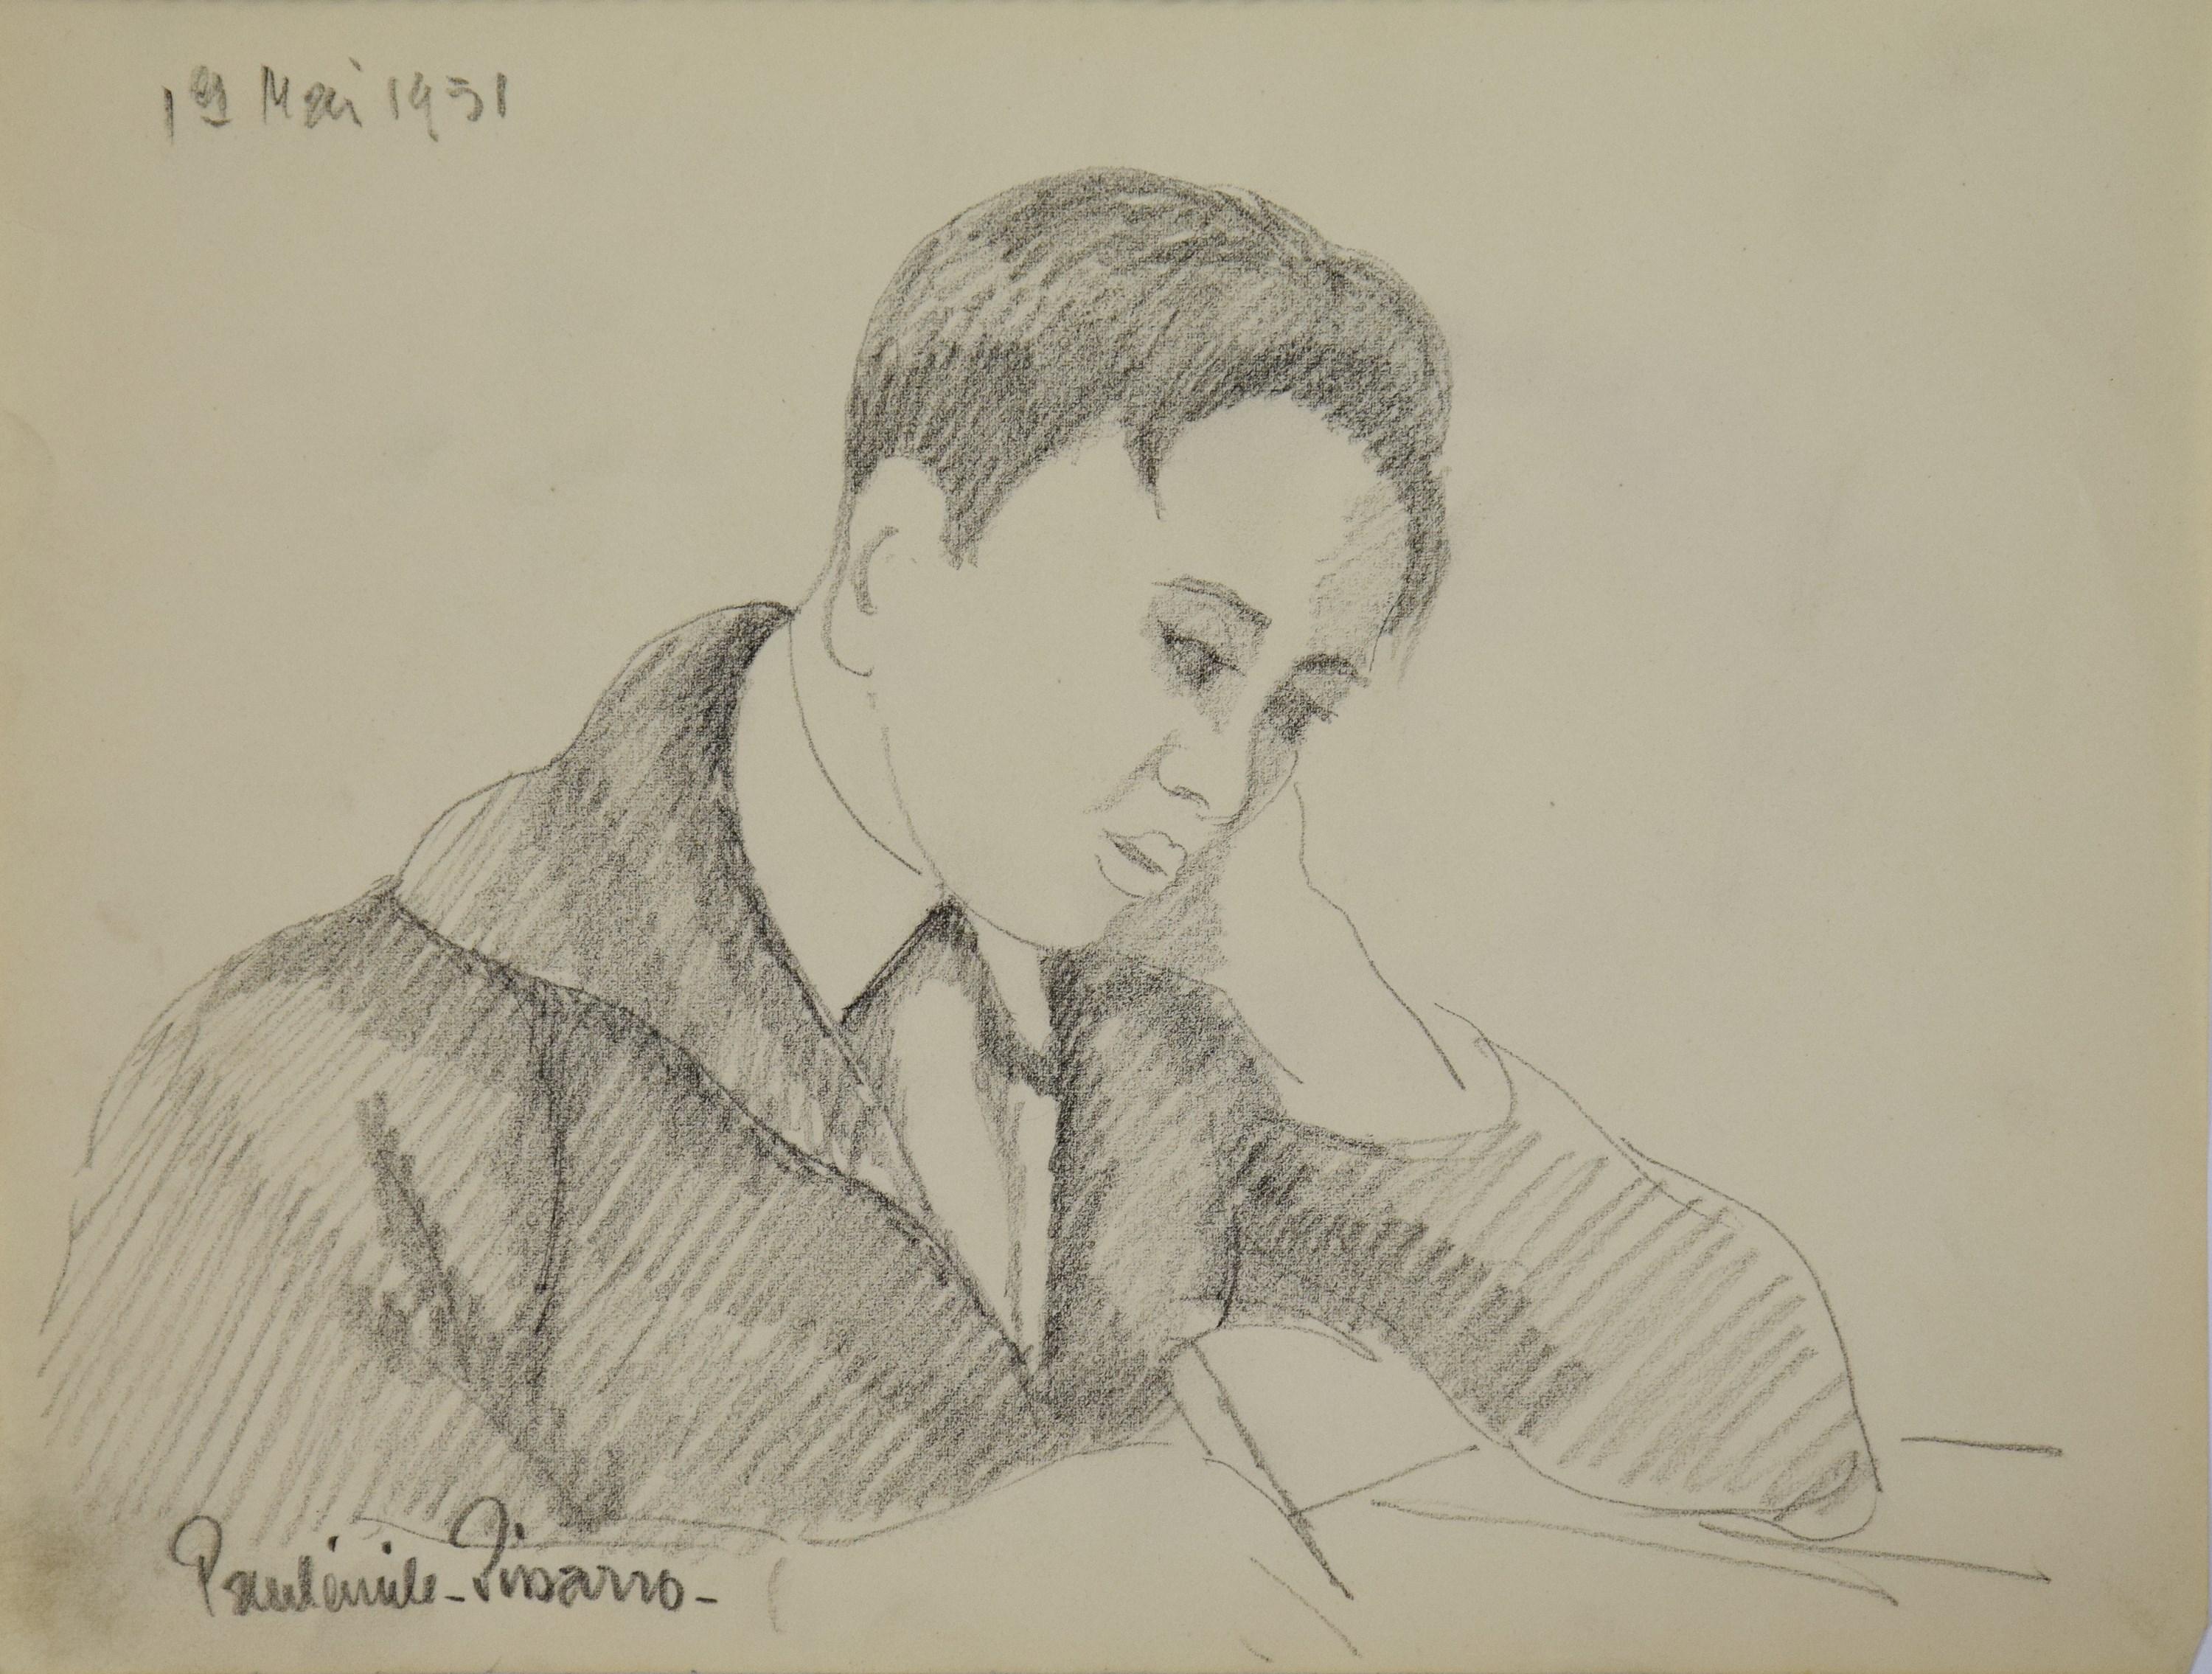 SOLD UNFRAMED 

Les Devoirs by Paulémile Pissarro (1884 - 1972)
Graphite on paper
20.2 x 27 cm (8 x 10 ⁵/₈ inches)
Signed lower left, Paulémile-Pissarro- and dated upper left
Executed in 1951

Provenance
Estate of the Artist
Yvonne Pissarro, née